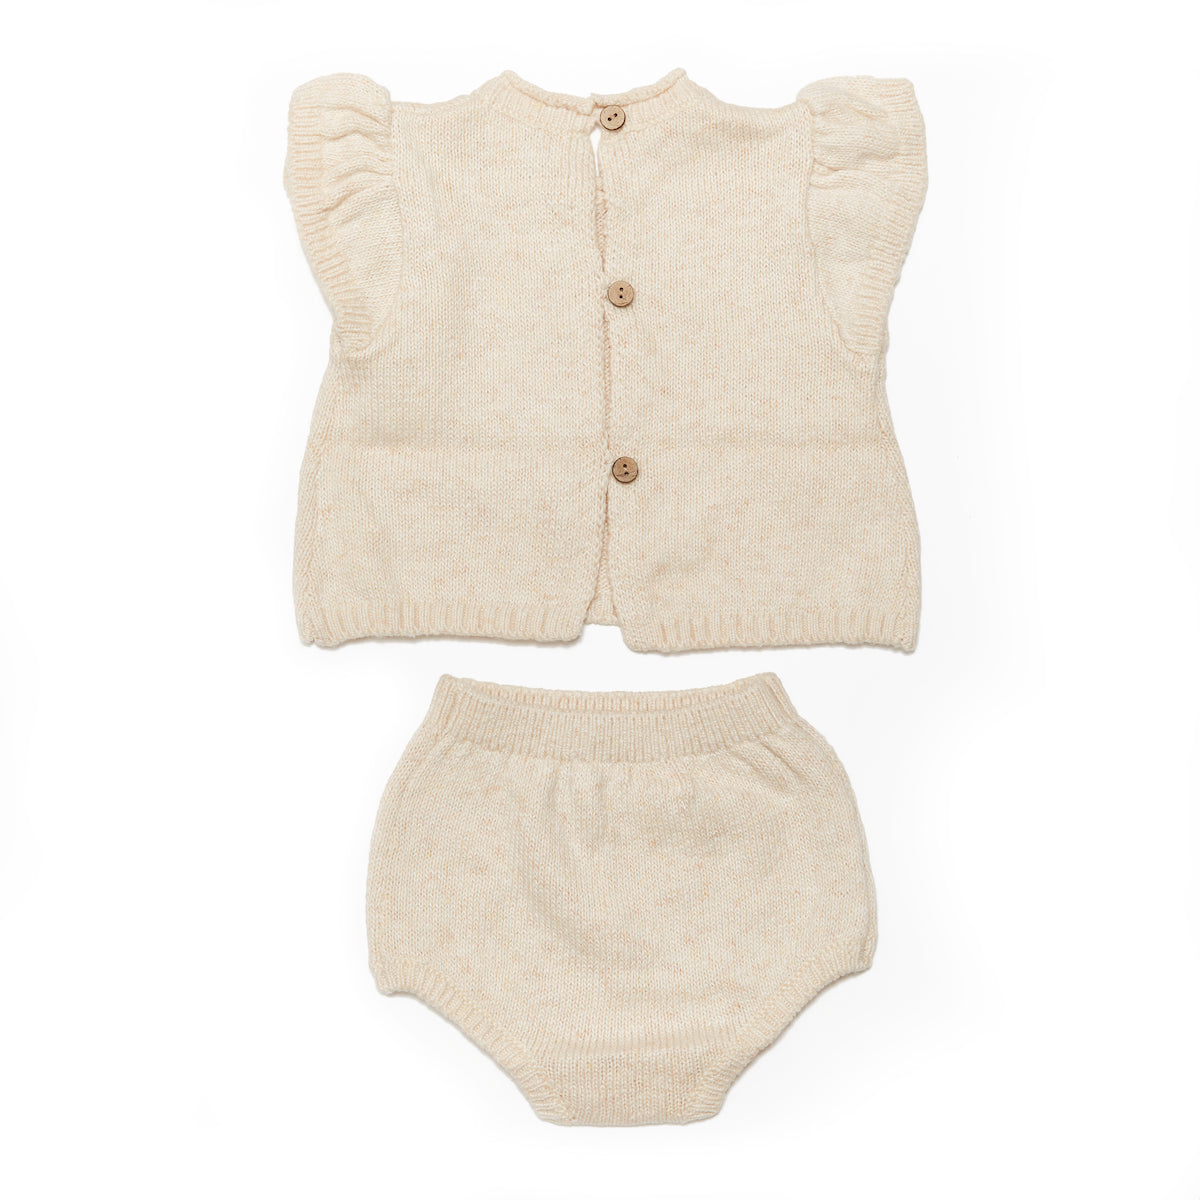 Quincy Mae Penny Knit Set - Natural Heather